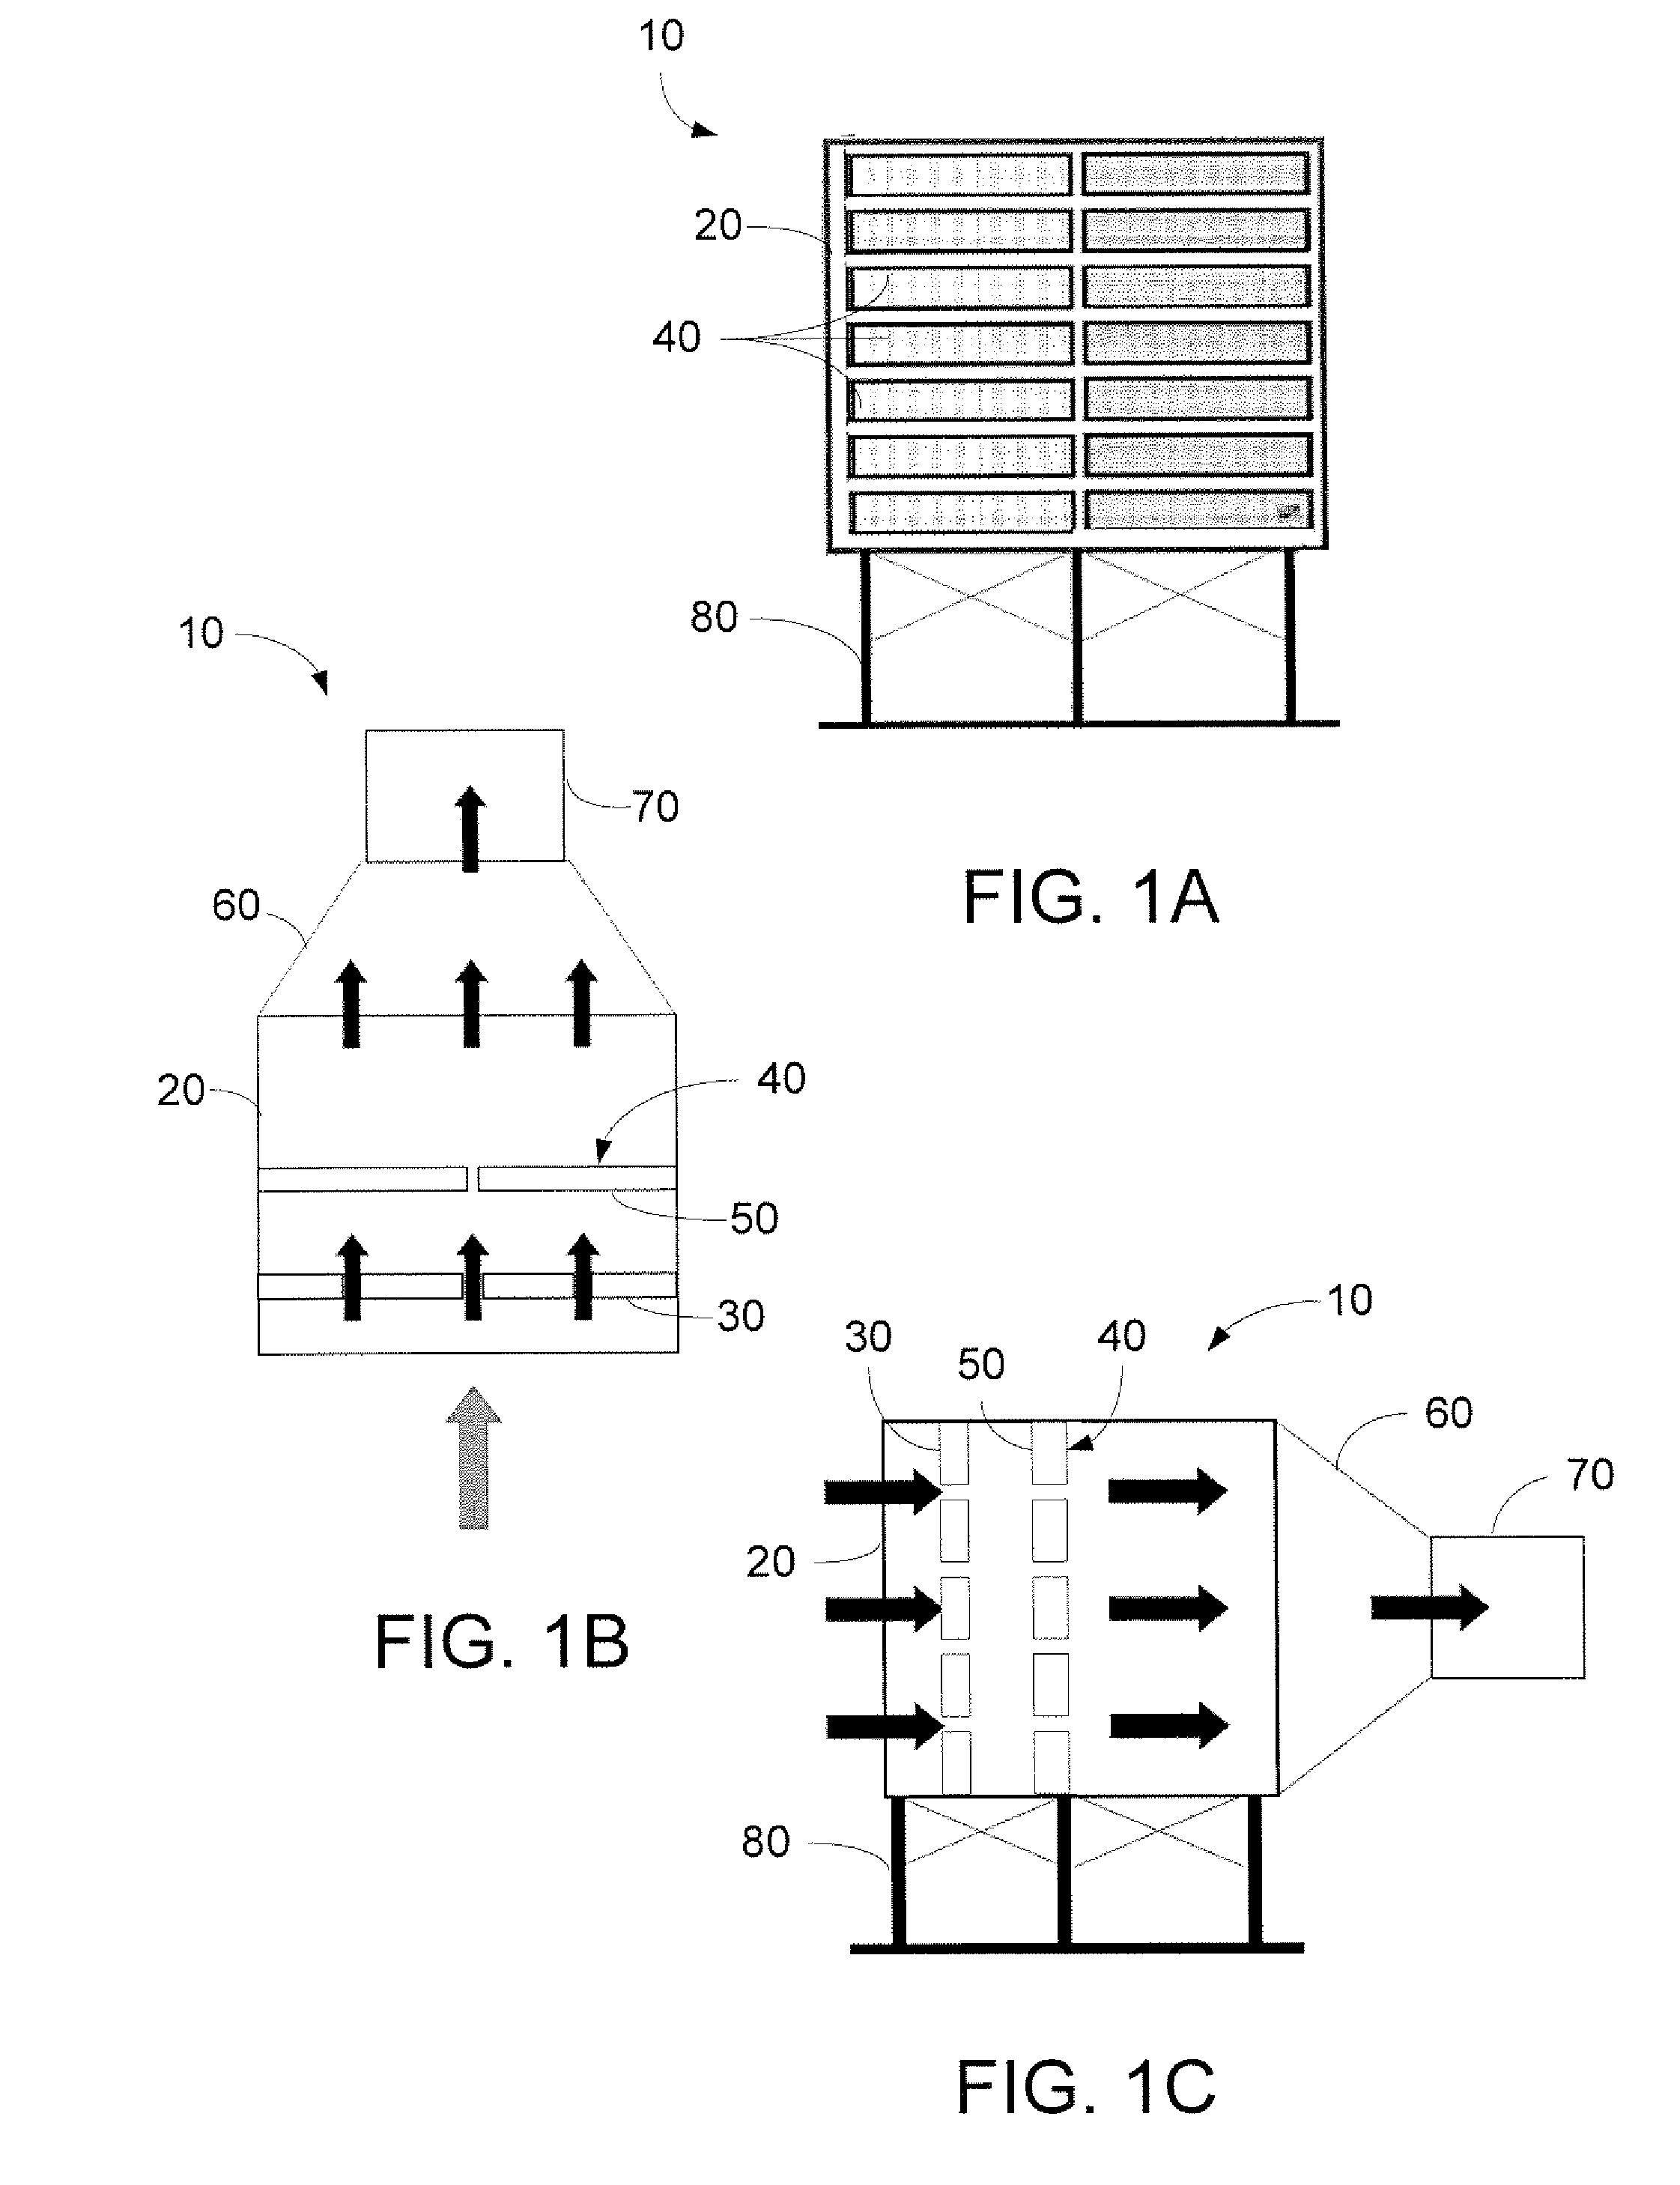 Air Bypass System for Gas turbine Inlet